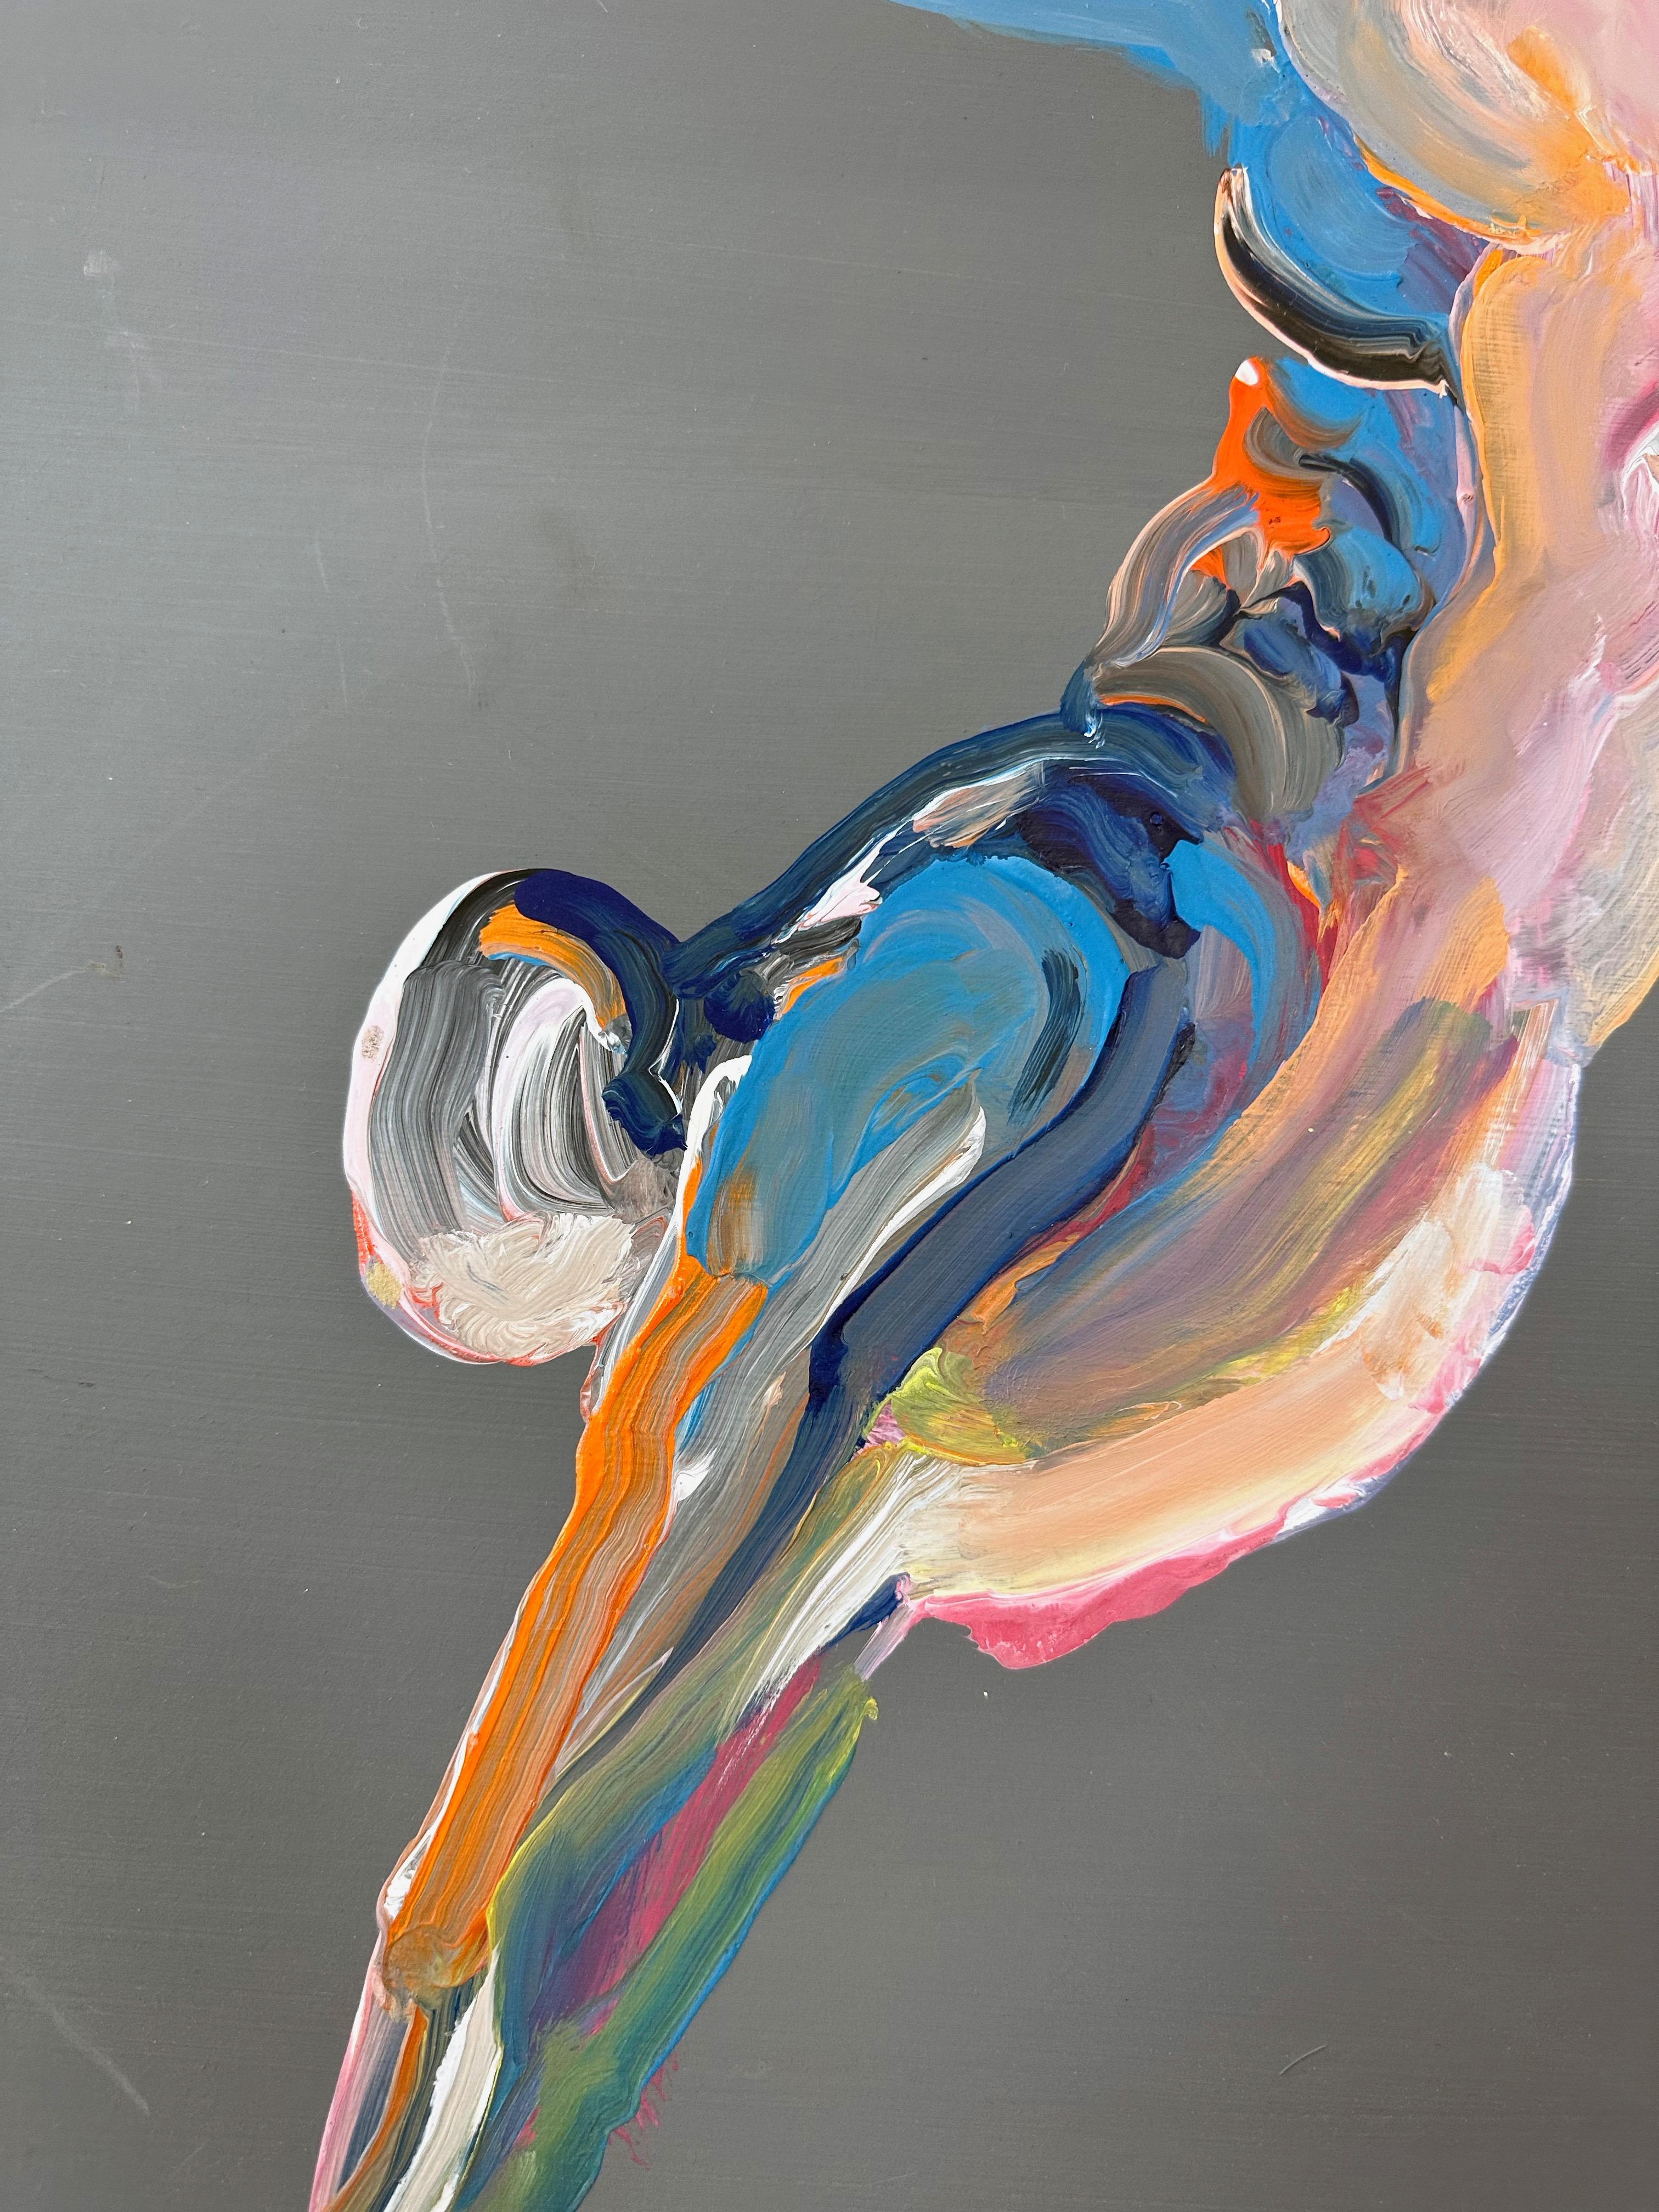 Wood Jan Stussy “Parachute Jump Series No. 12”, Expressionist Acrylic Painting, 1980s For Sale